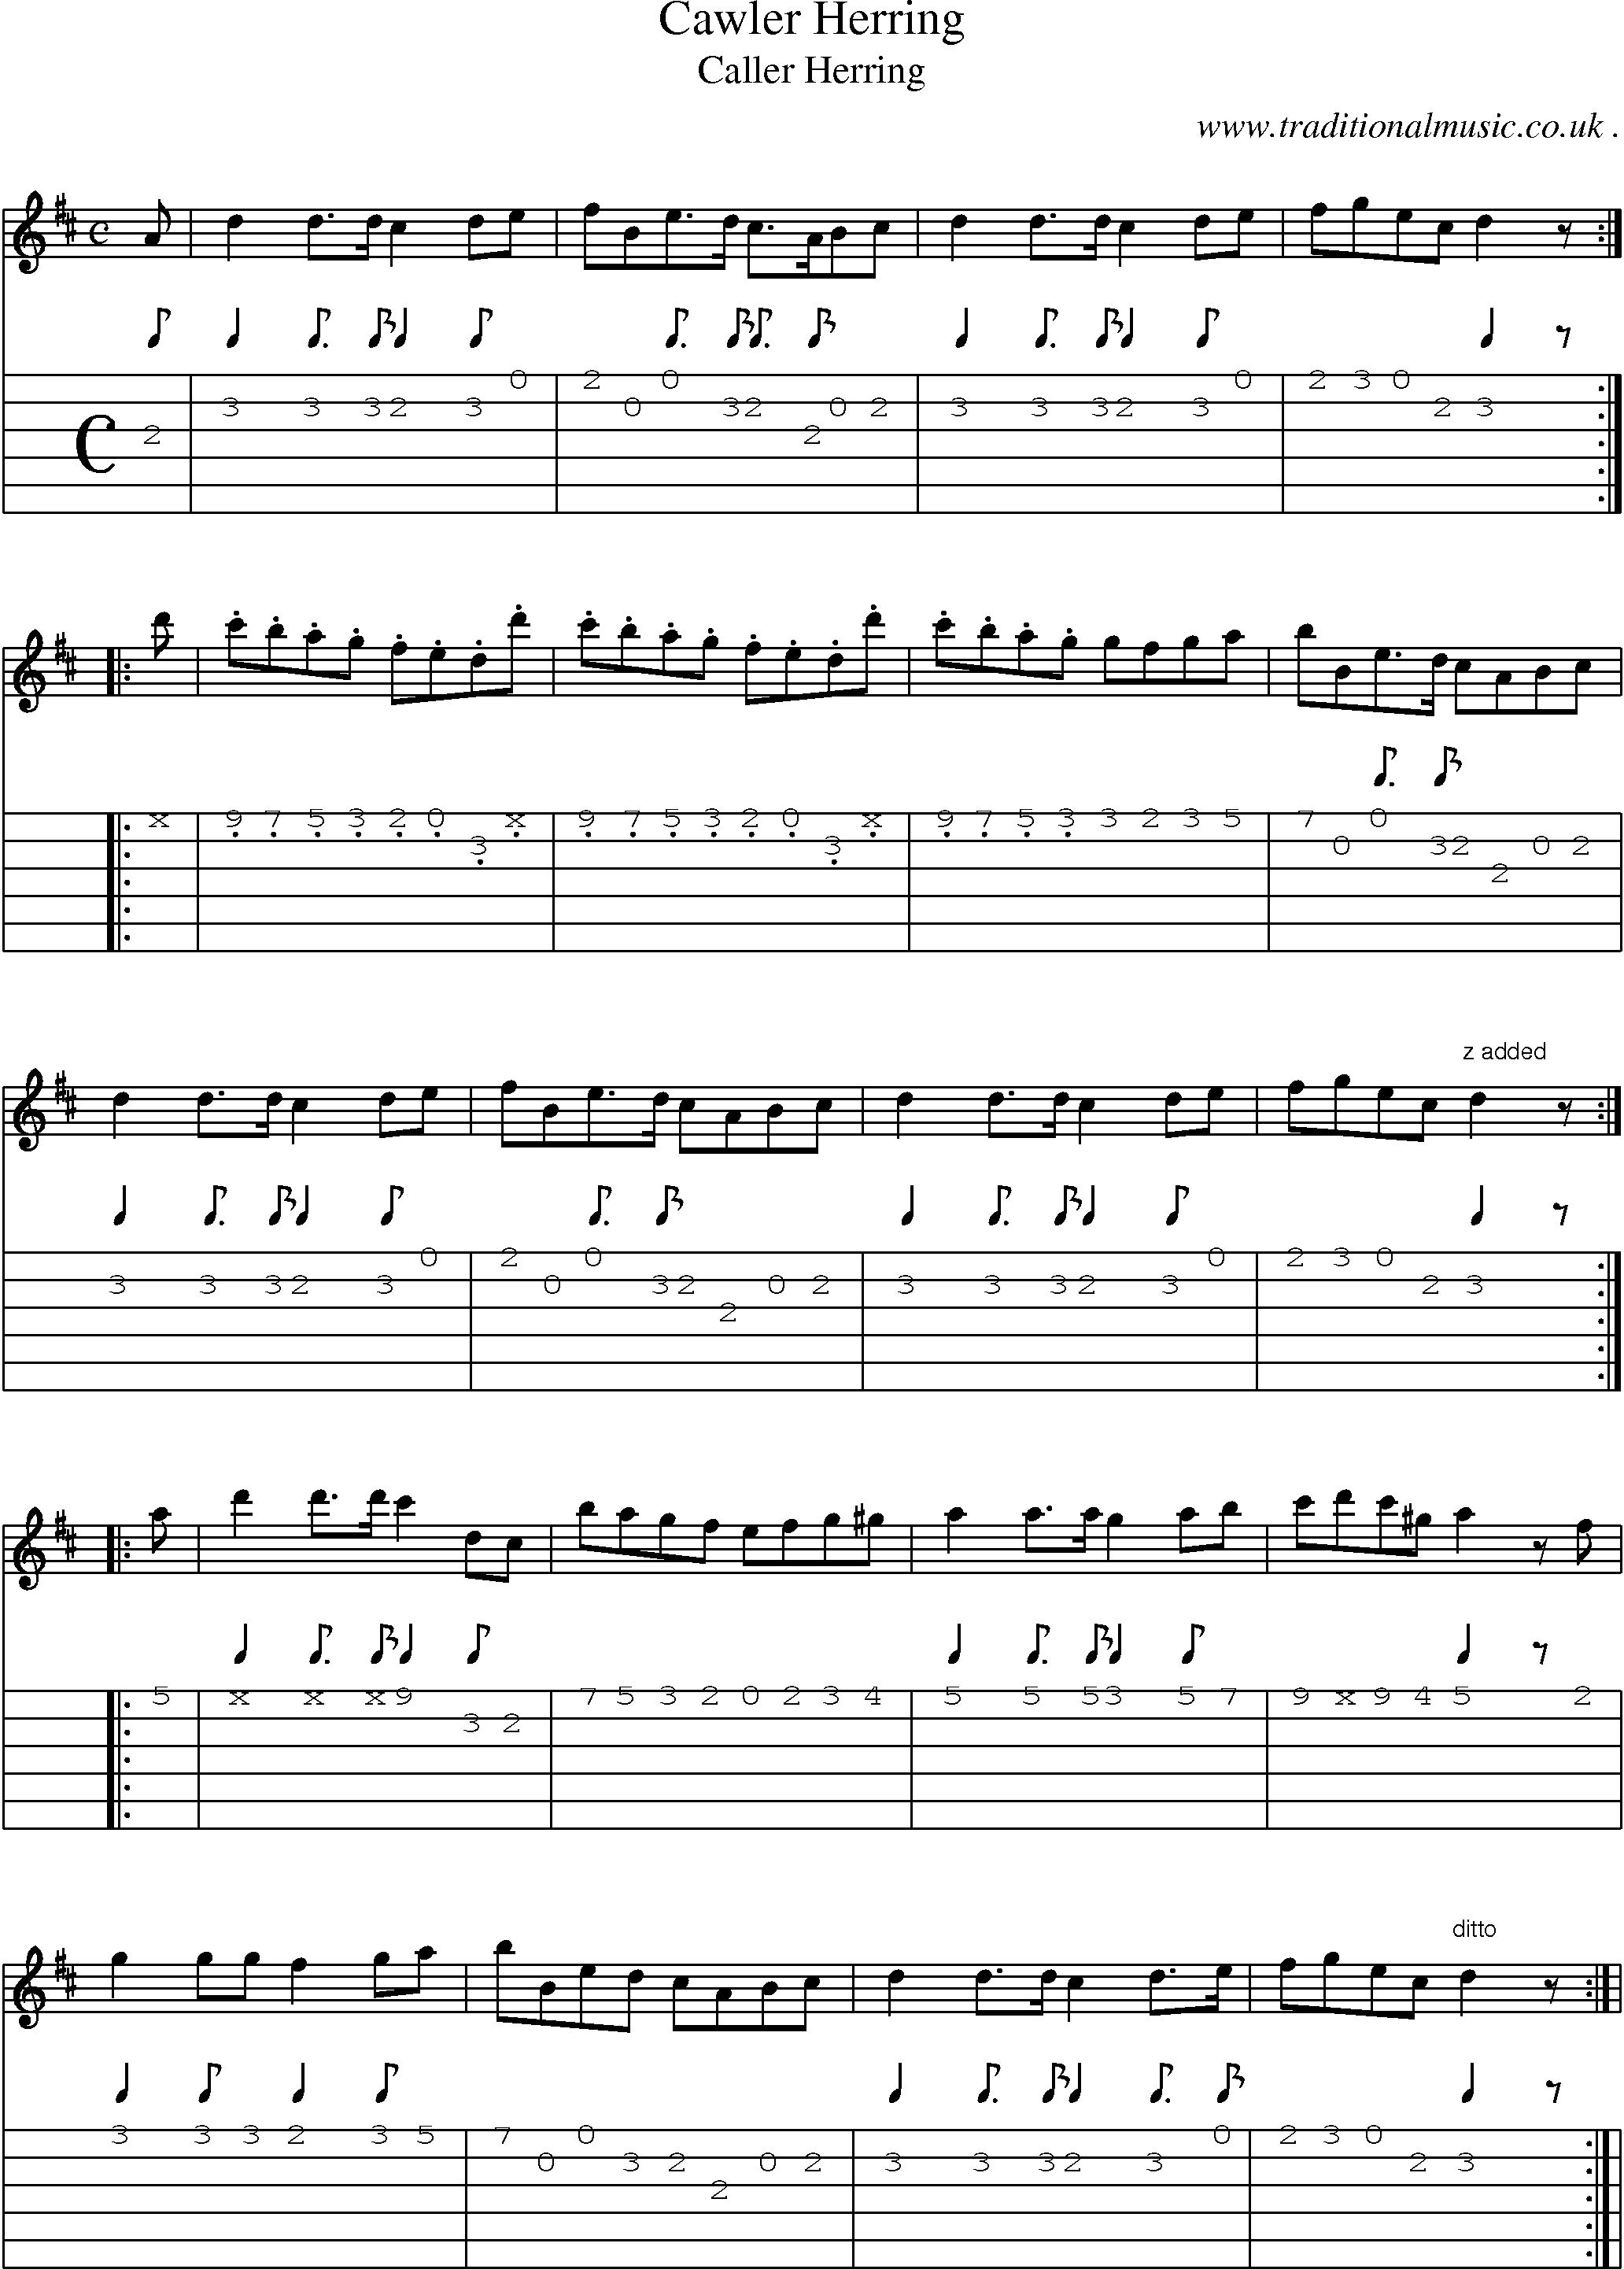 Sheet-Music and Guitar Tabs for Cawler Herring